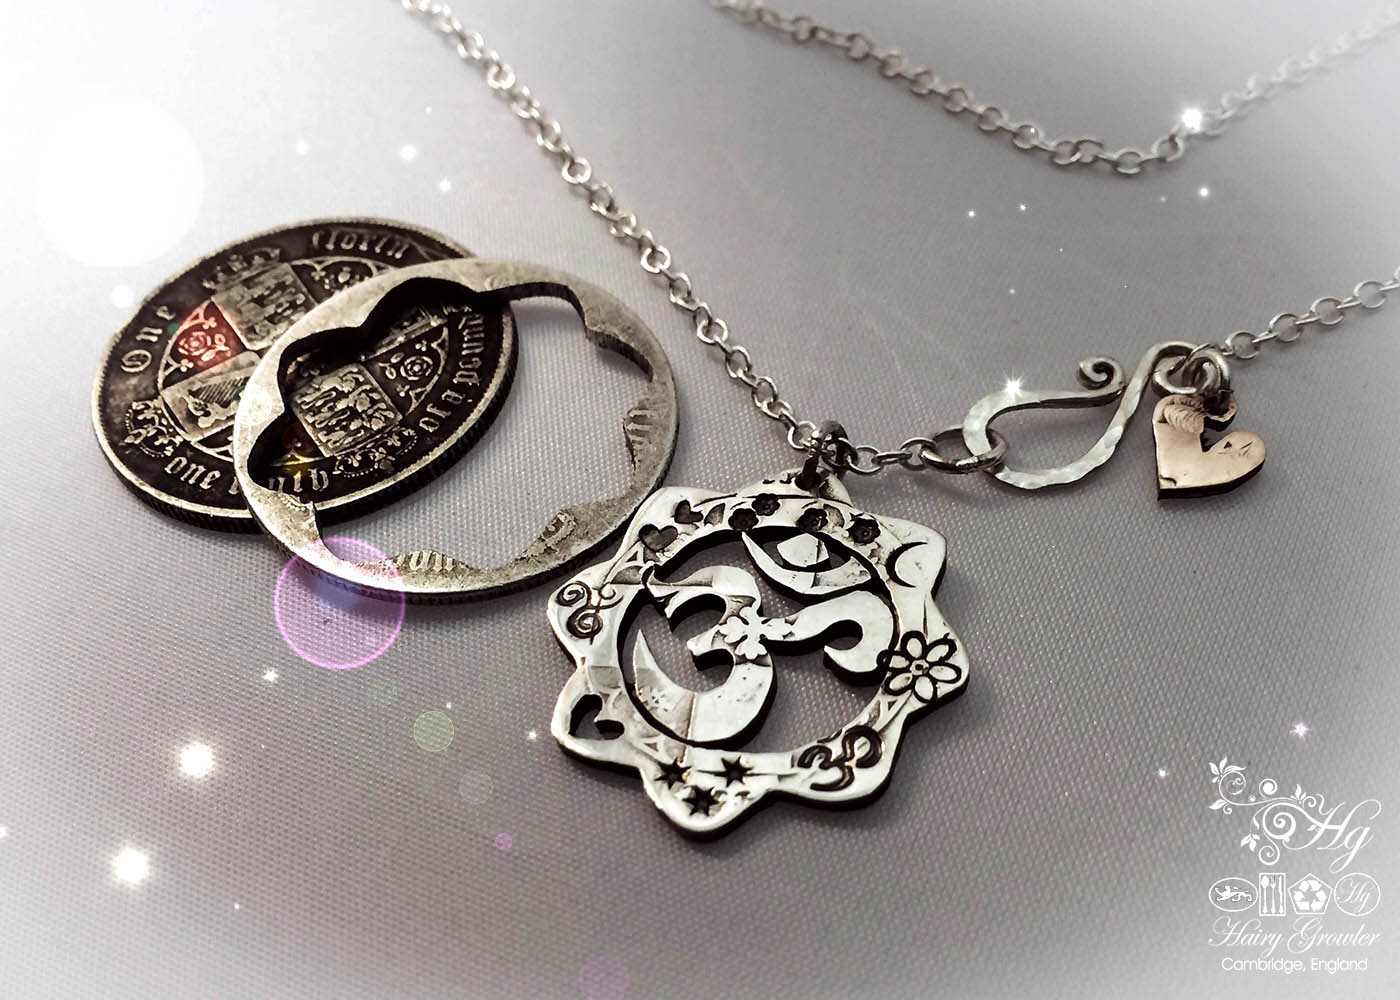 Om silver pendants - handmade and recycled using silver coins